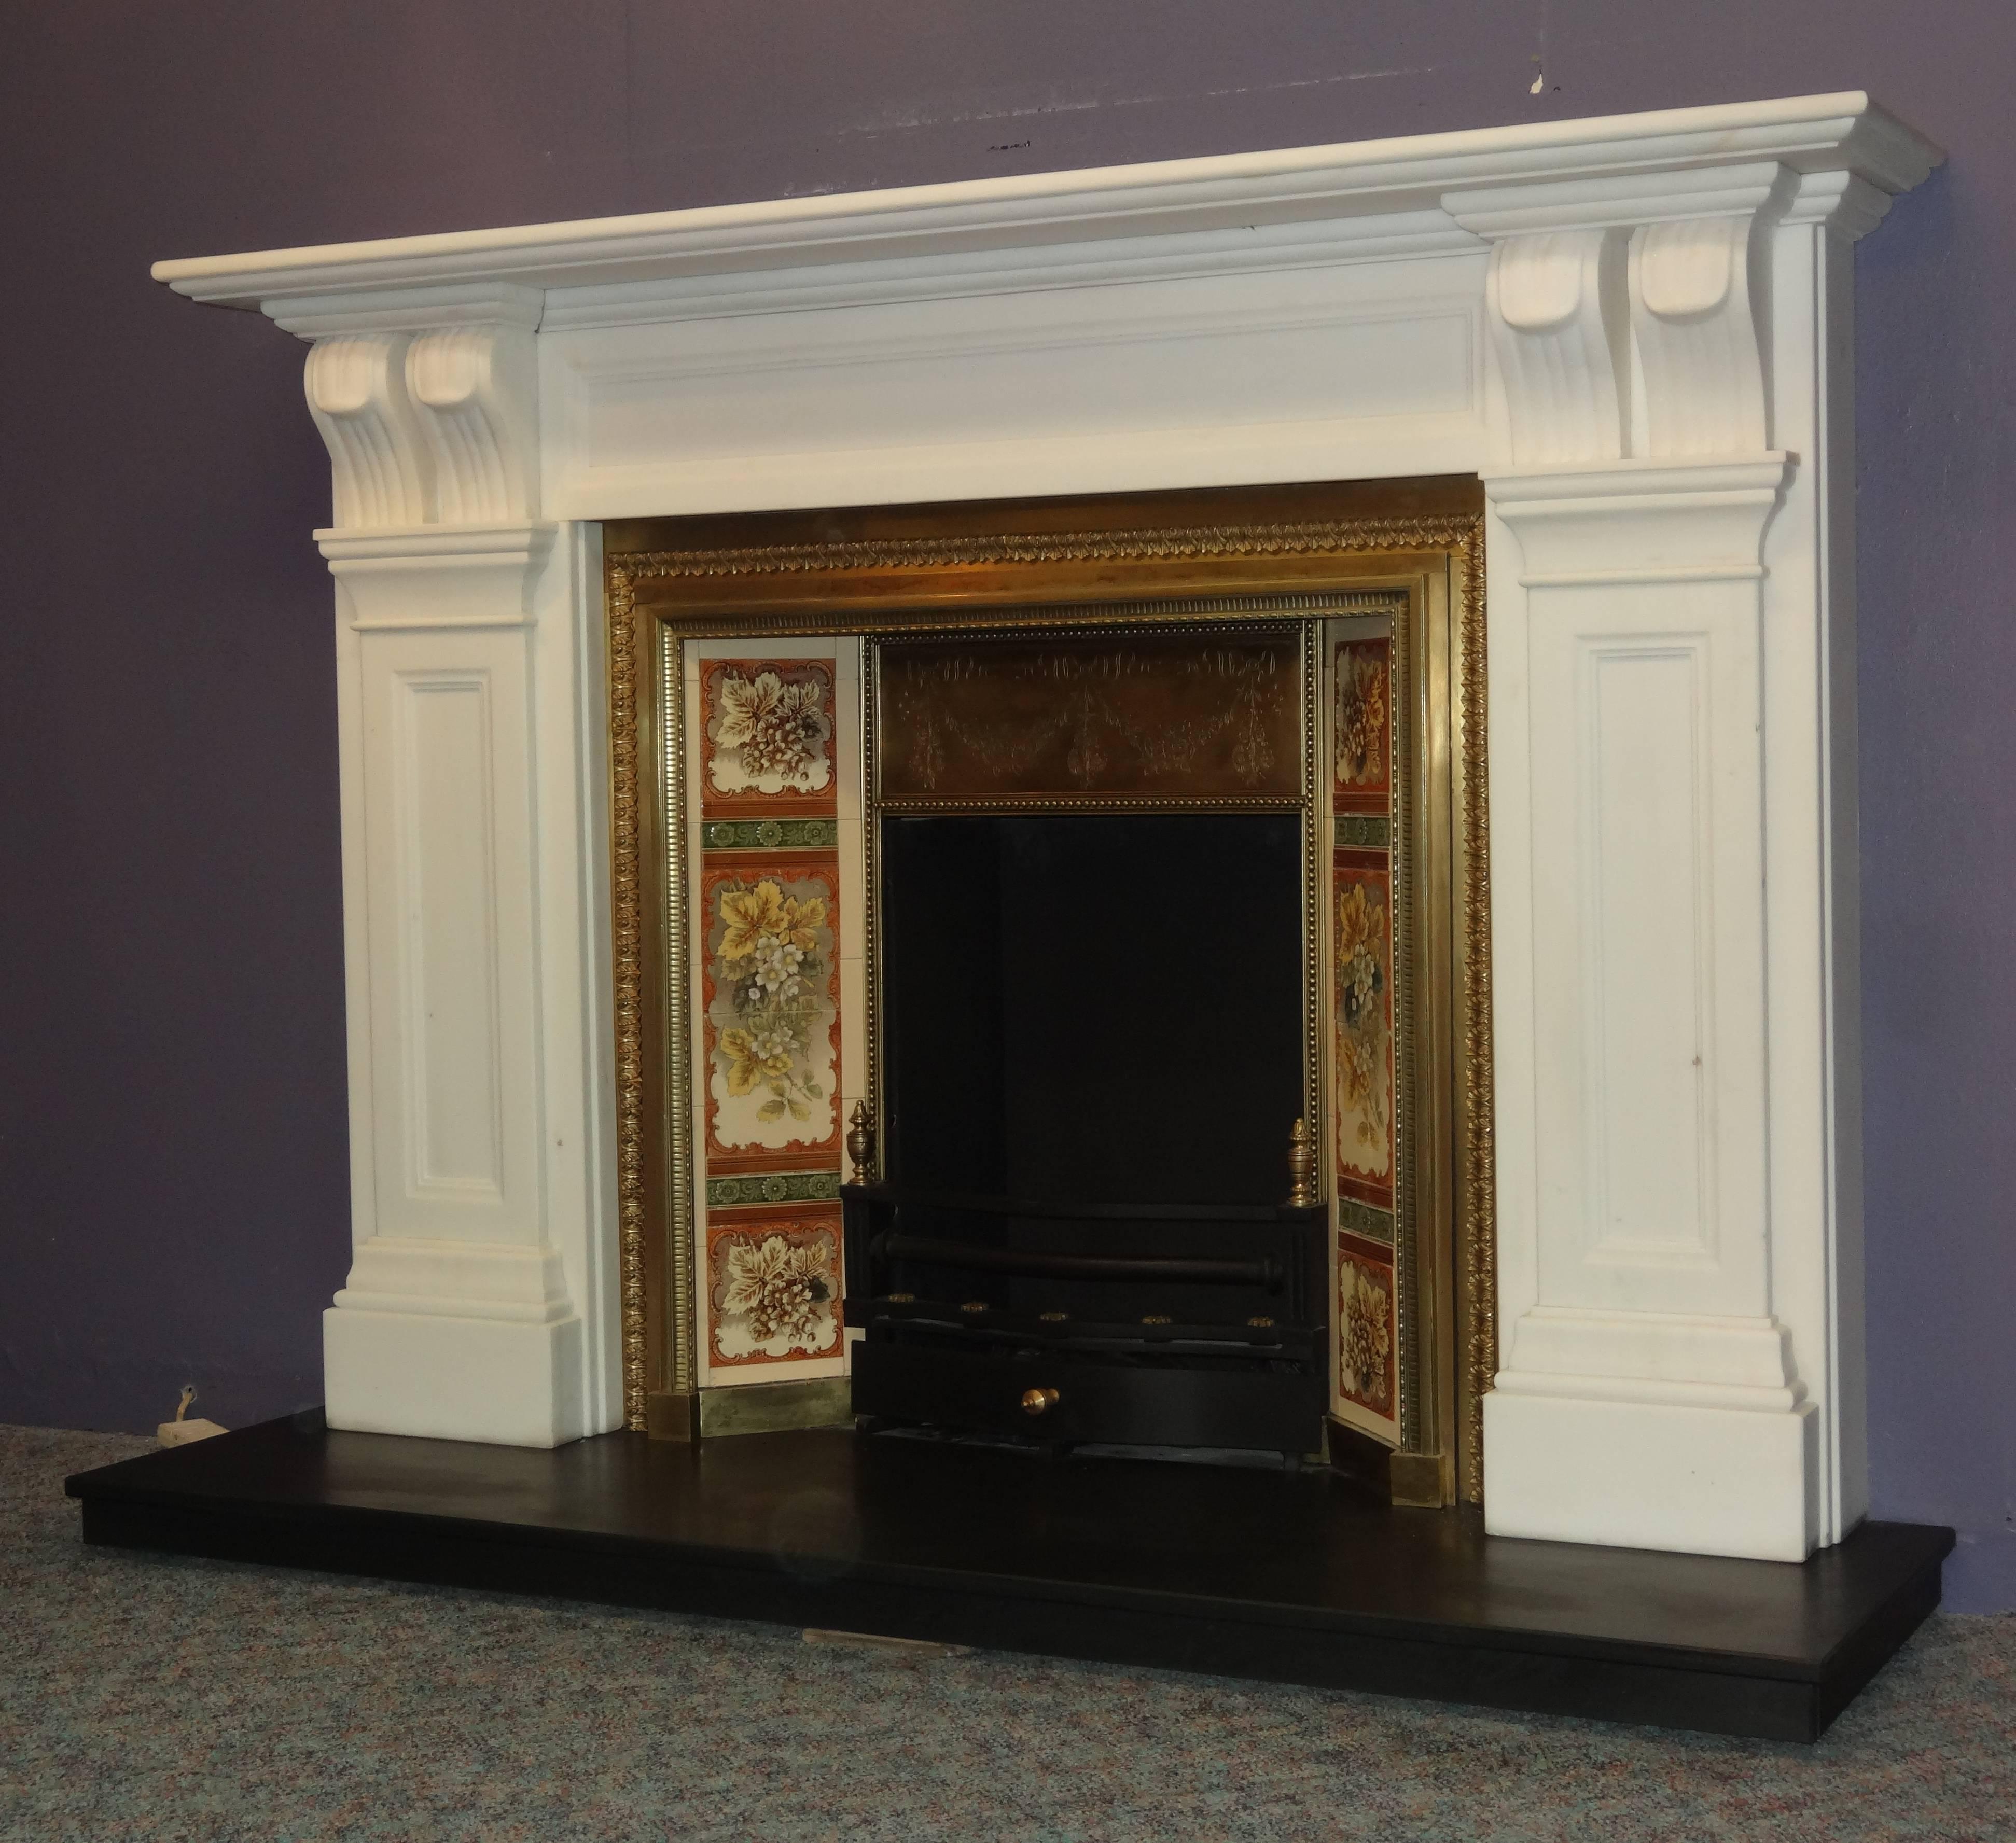 Northern Irish Antique Victorian Style White Marble Fire Surround and Victorian Brass Grate For Sale